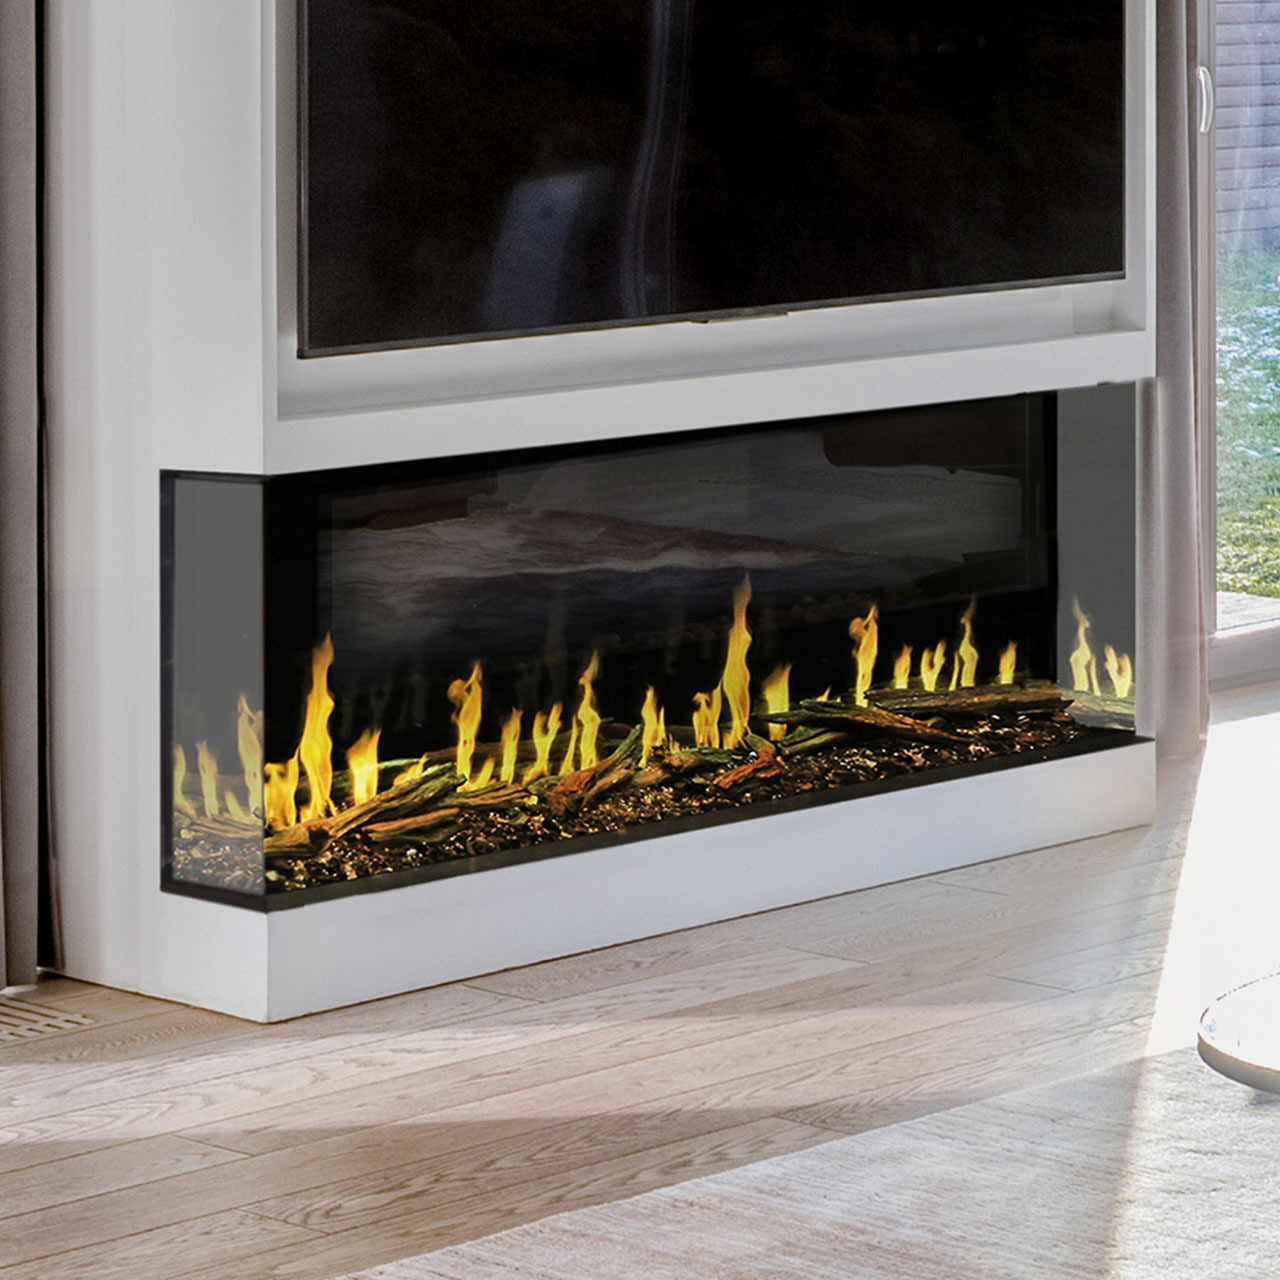 Top 5 Linear Electric Fireplaces